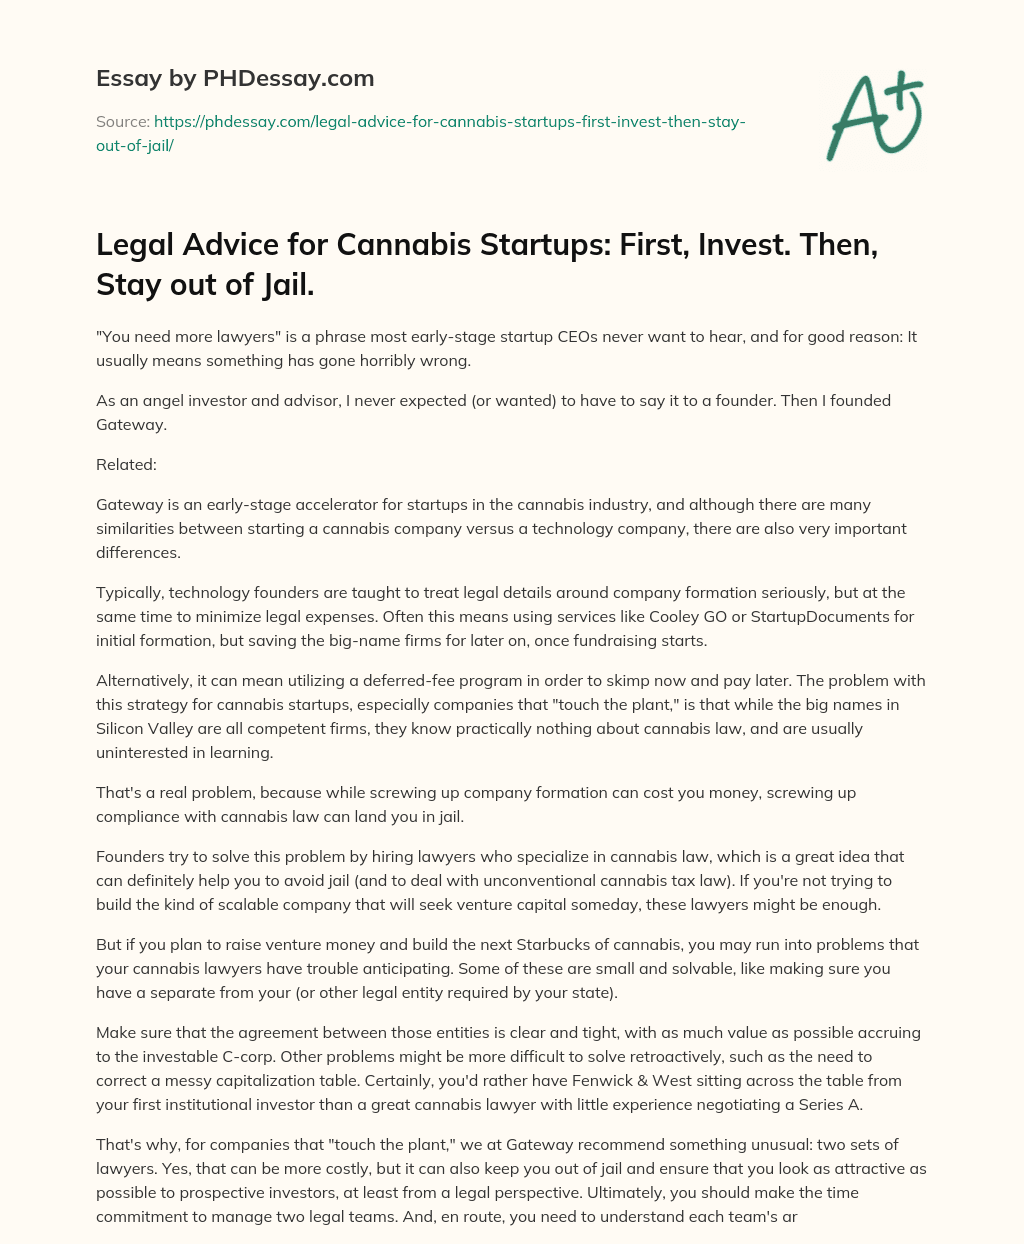 Legal Advice for Cannabis Startups: First, Invest. Then, Stay out of Jail. essay